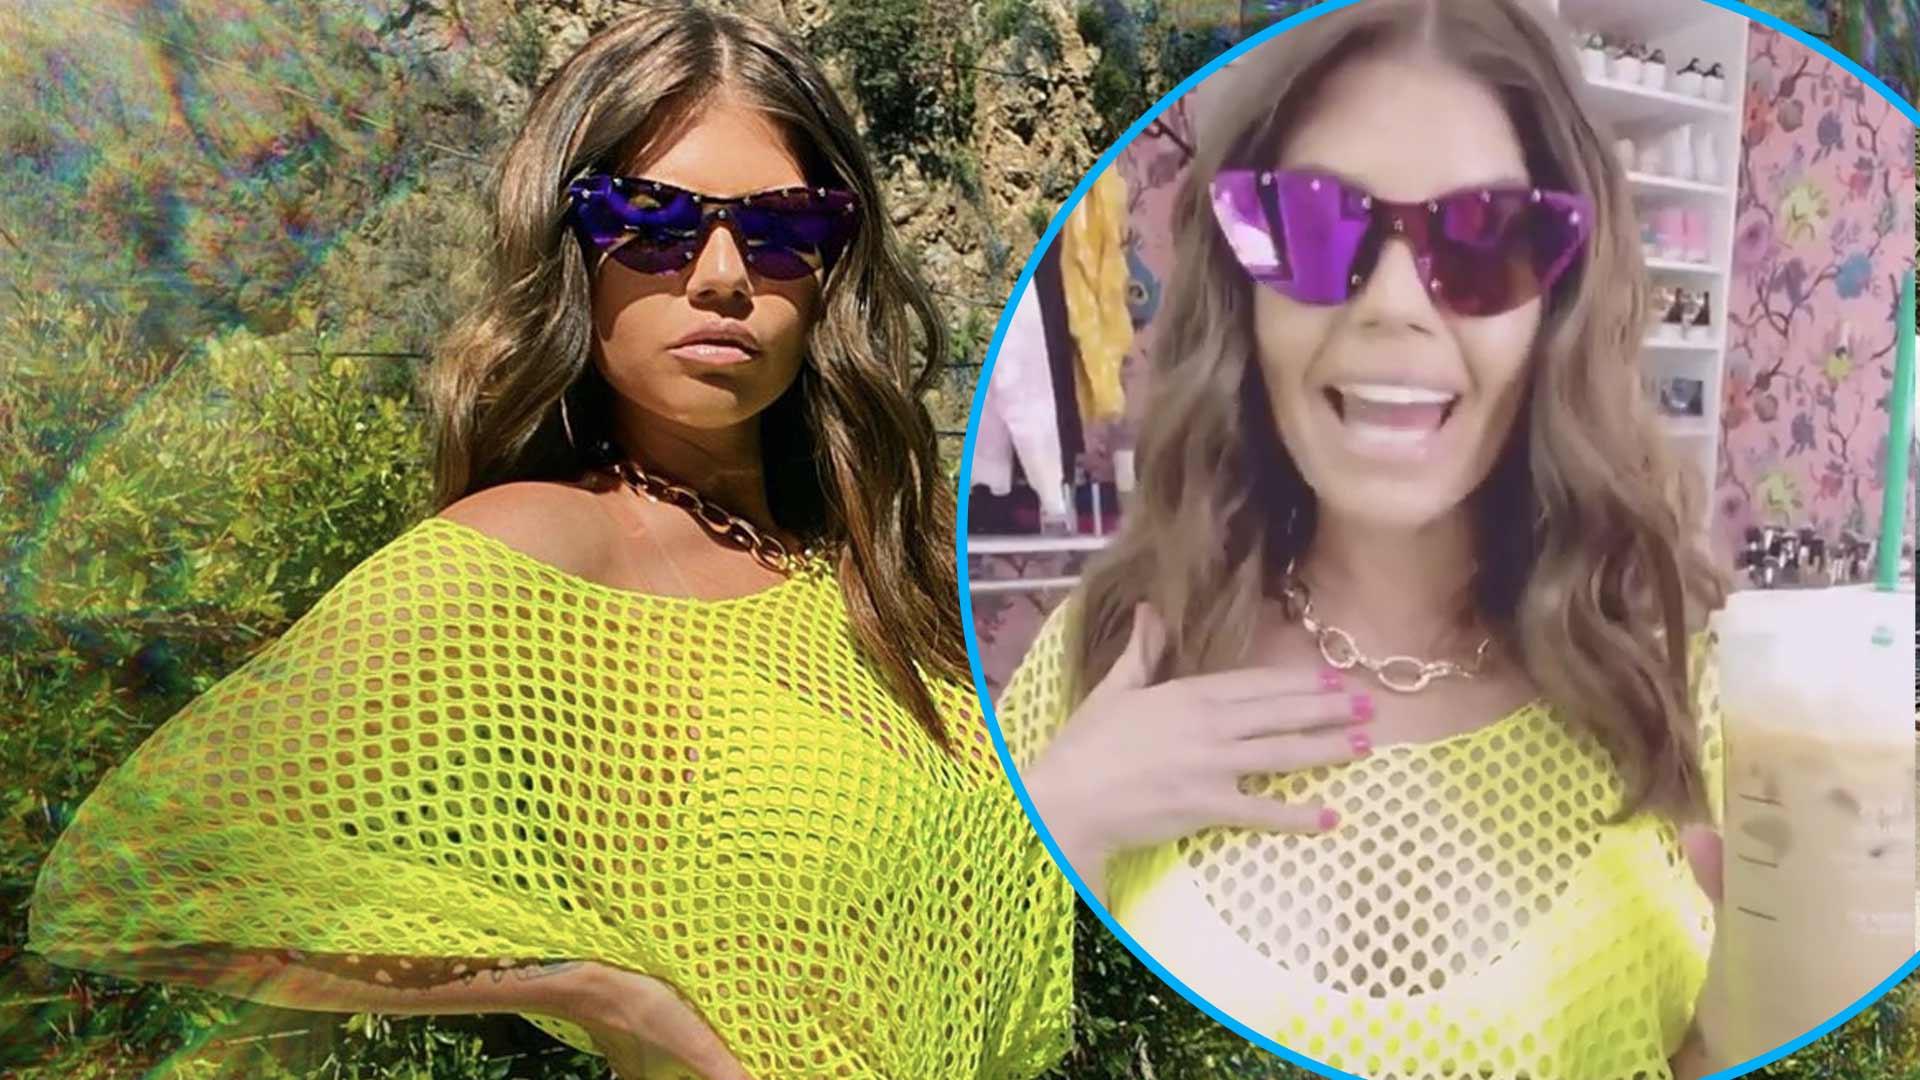 Chanel West Coast Uses The K-Word For Viral TikTok Video: 'Call Me Karen!'  - The Blast